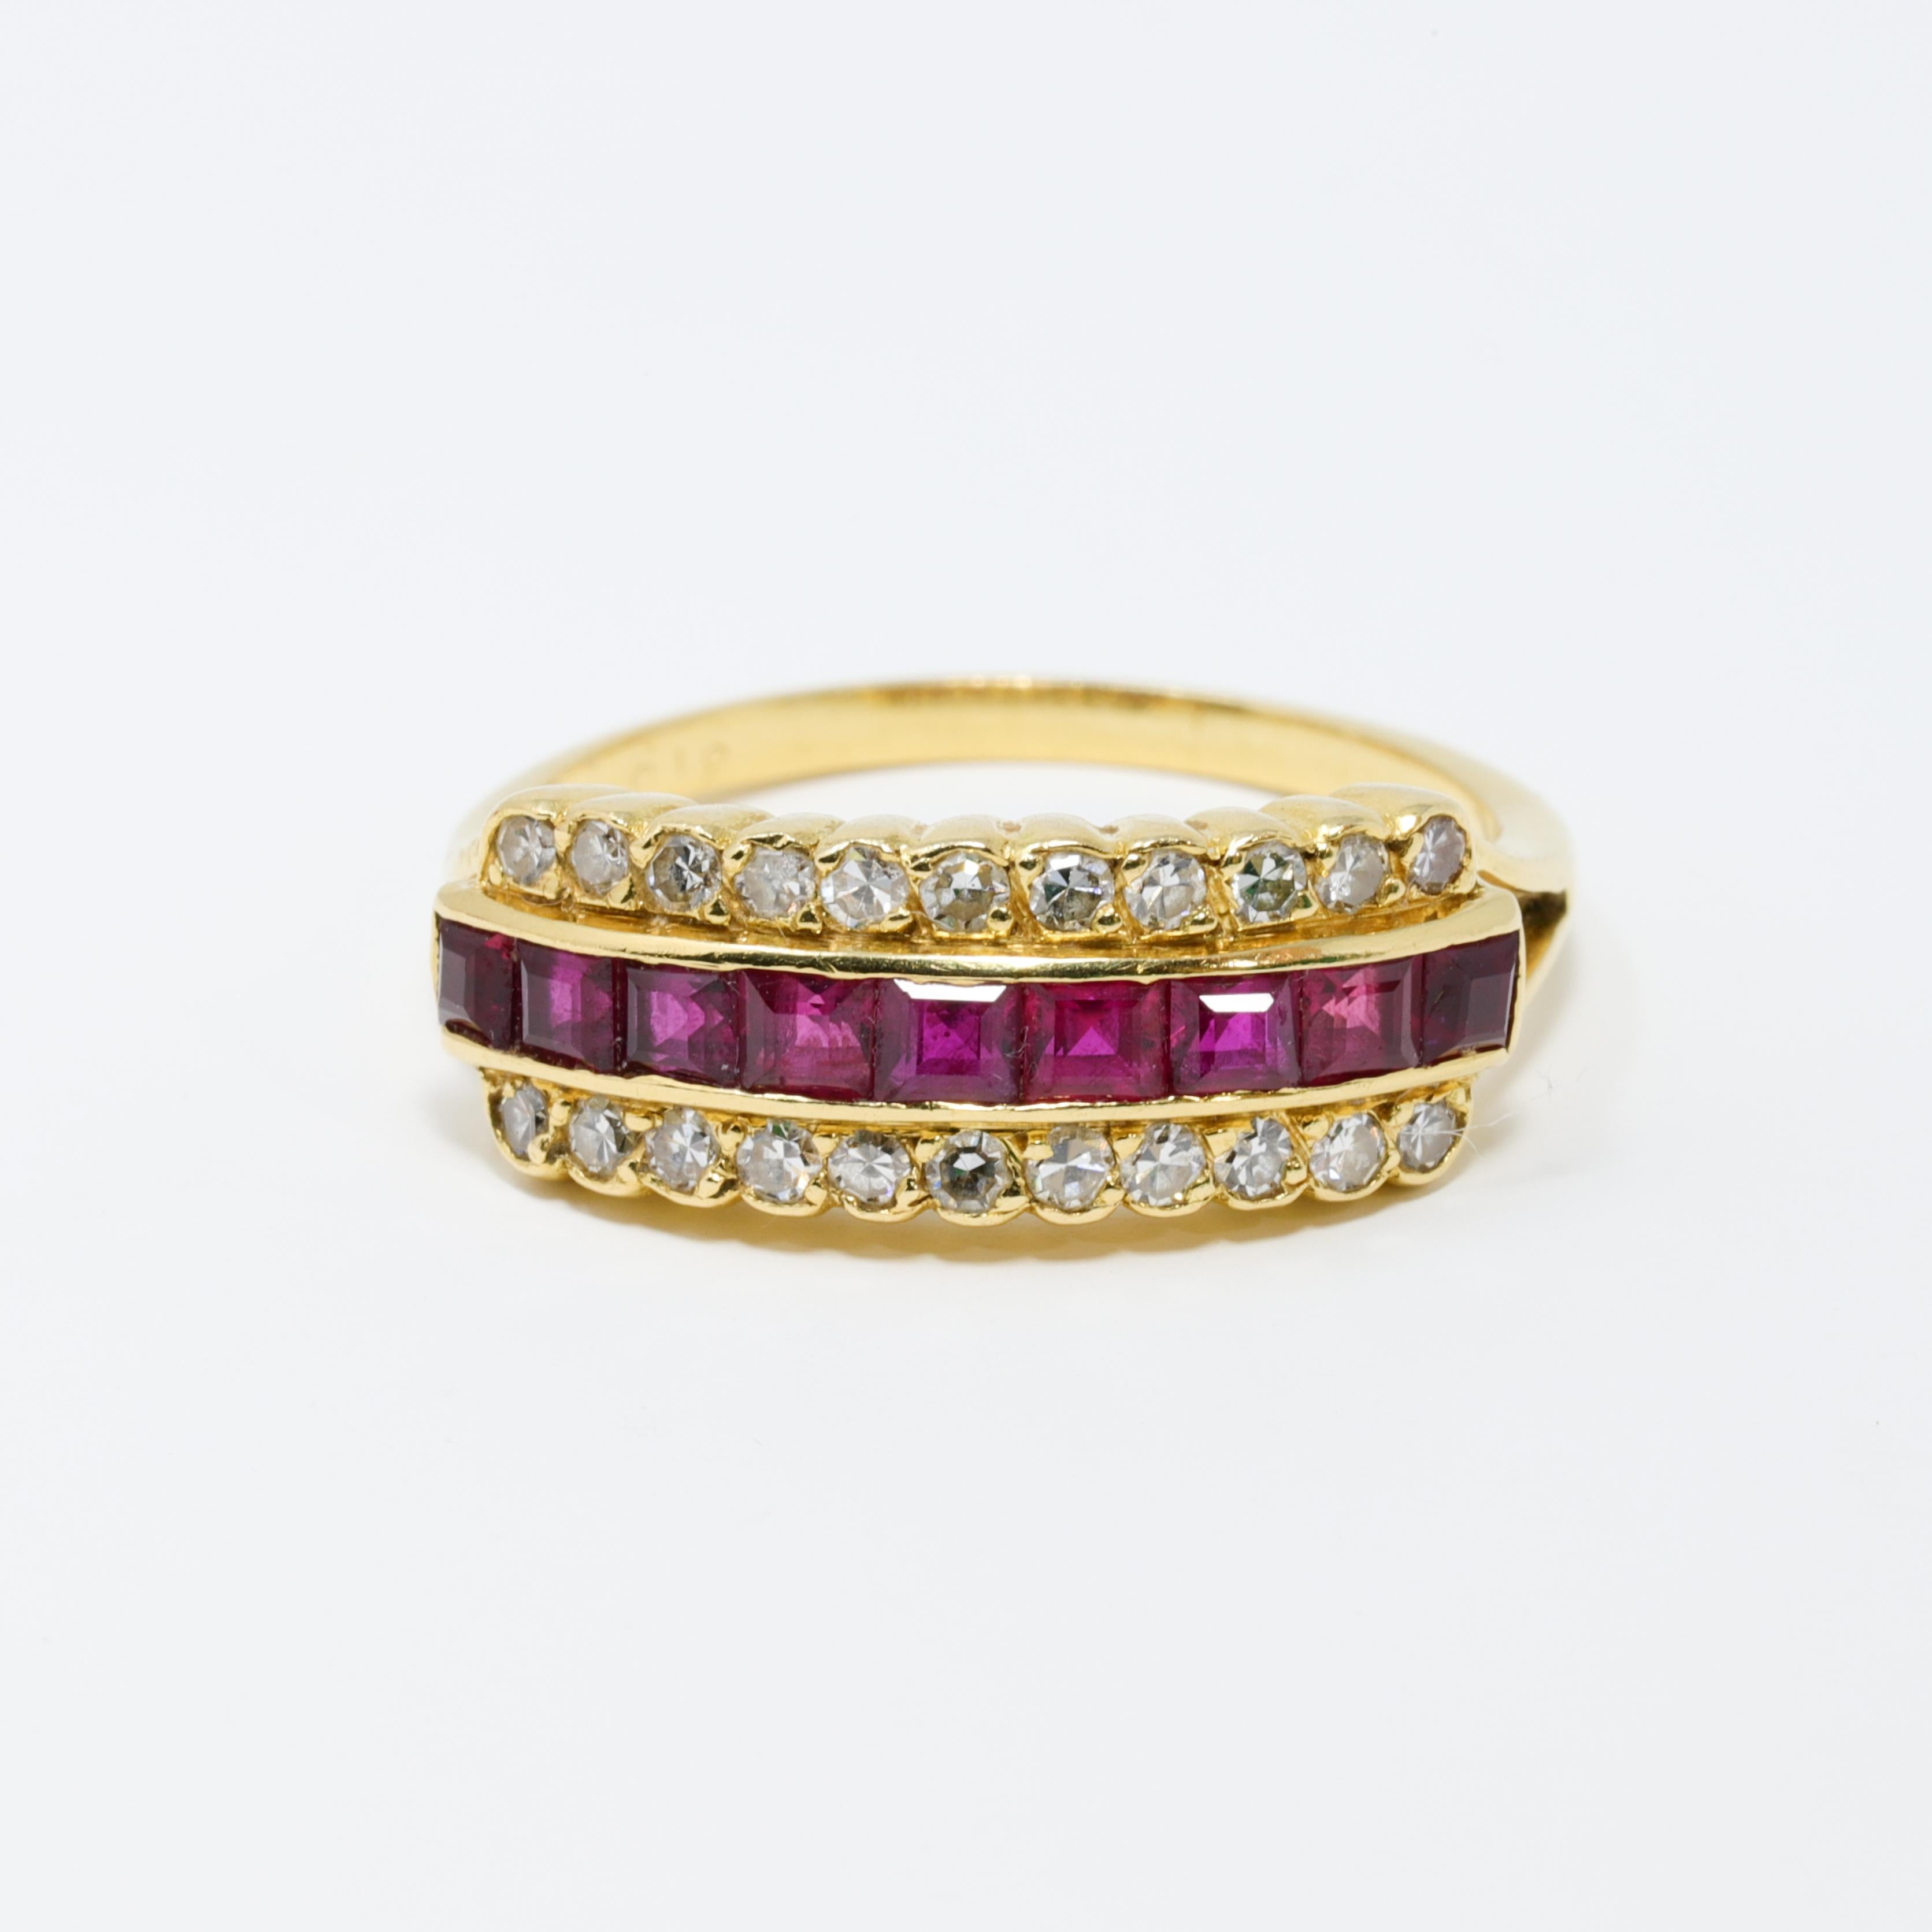 A classy ring with a brilliant sparkle. Features 9 square-cut, open back genuine rubies (.05 ct each) set between two rows of eleven 1.3mm round diamonds. All set on 14K gold band.

US Size 6
Hallmarks: 819